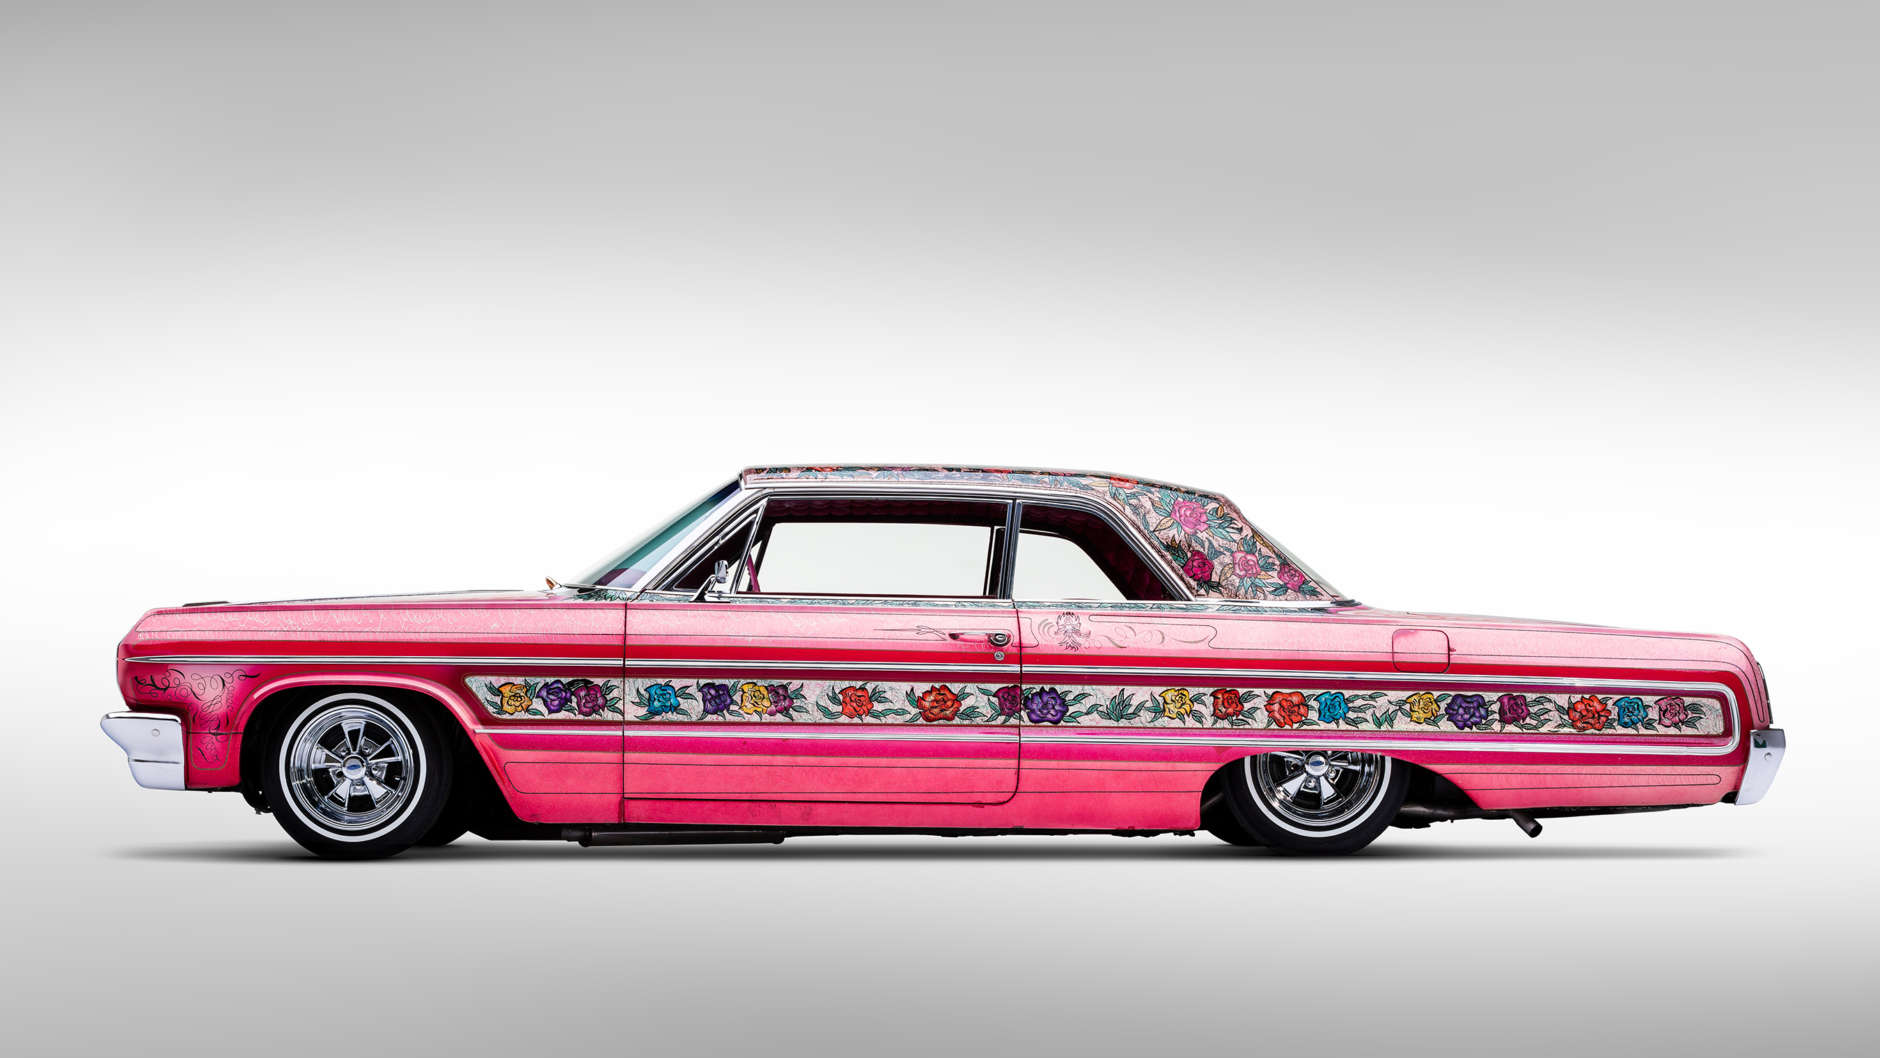 "Gypsy Rose" is a 1964 Chevrolet Impala "lowrider” that was featured in the opening credits of the television sitcom "Chico and the Man." (Courtesy National Historic Vehicle Register)